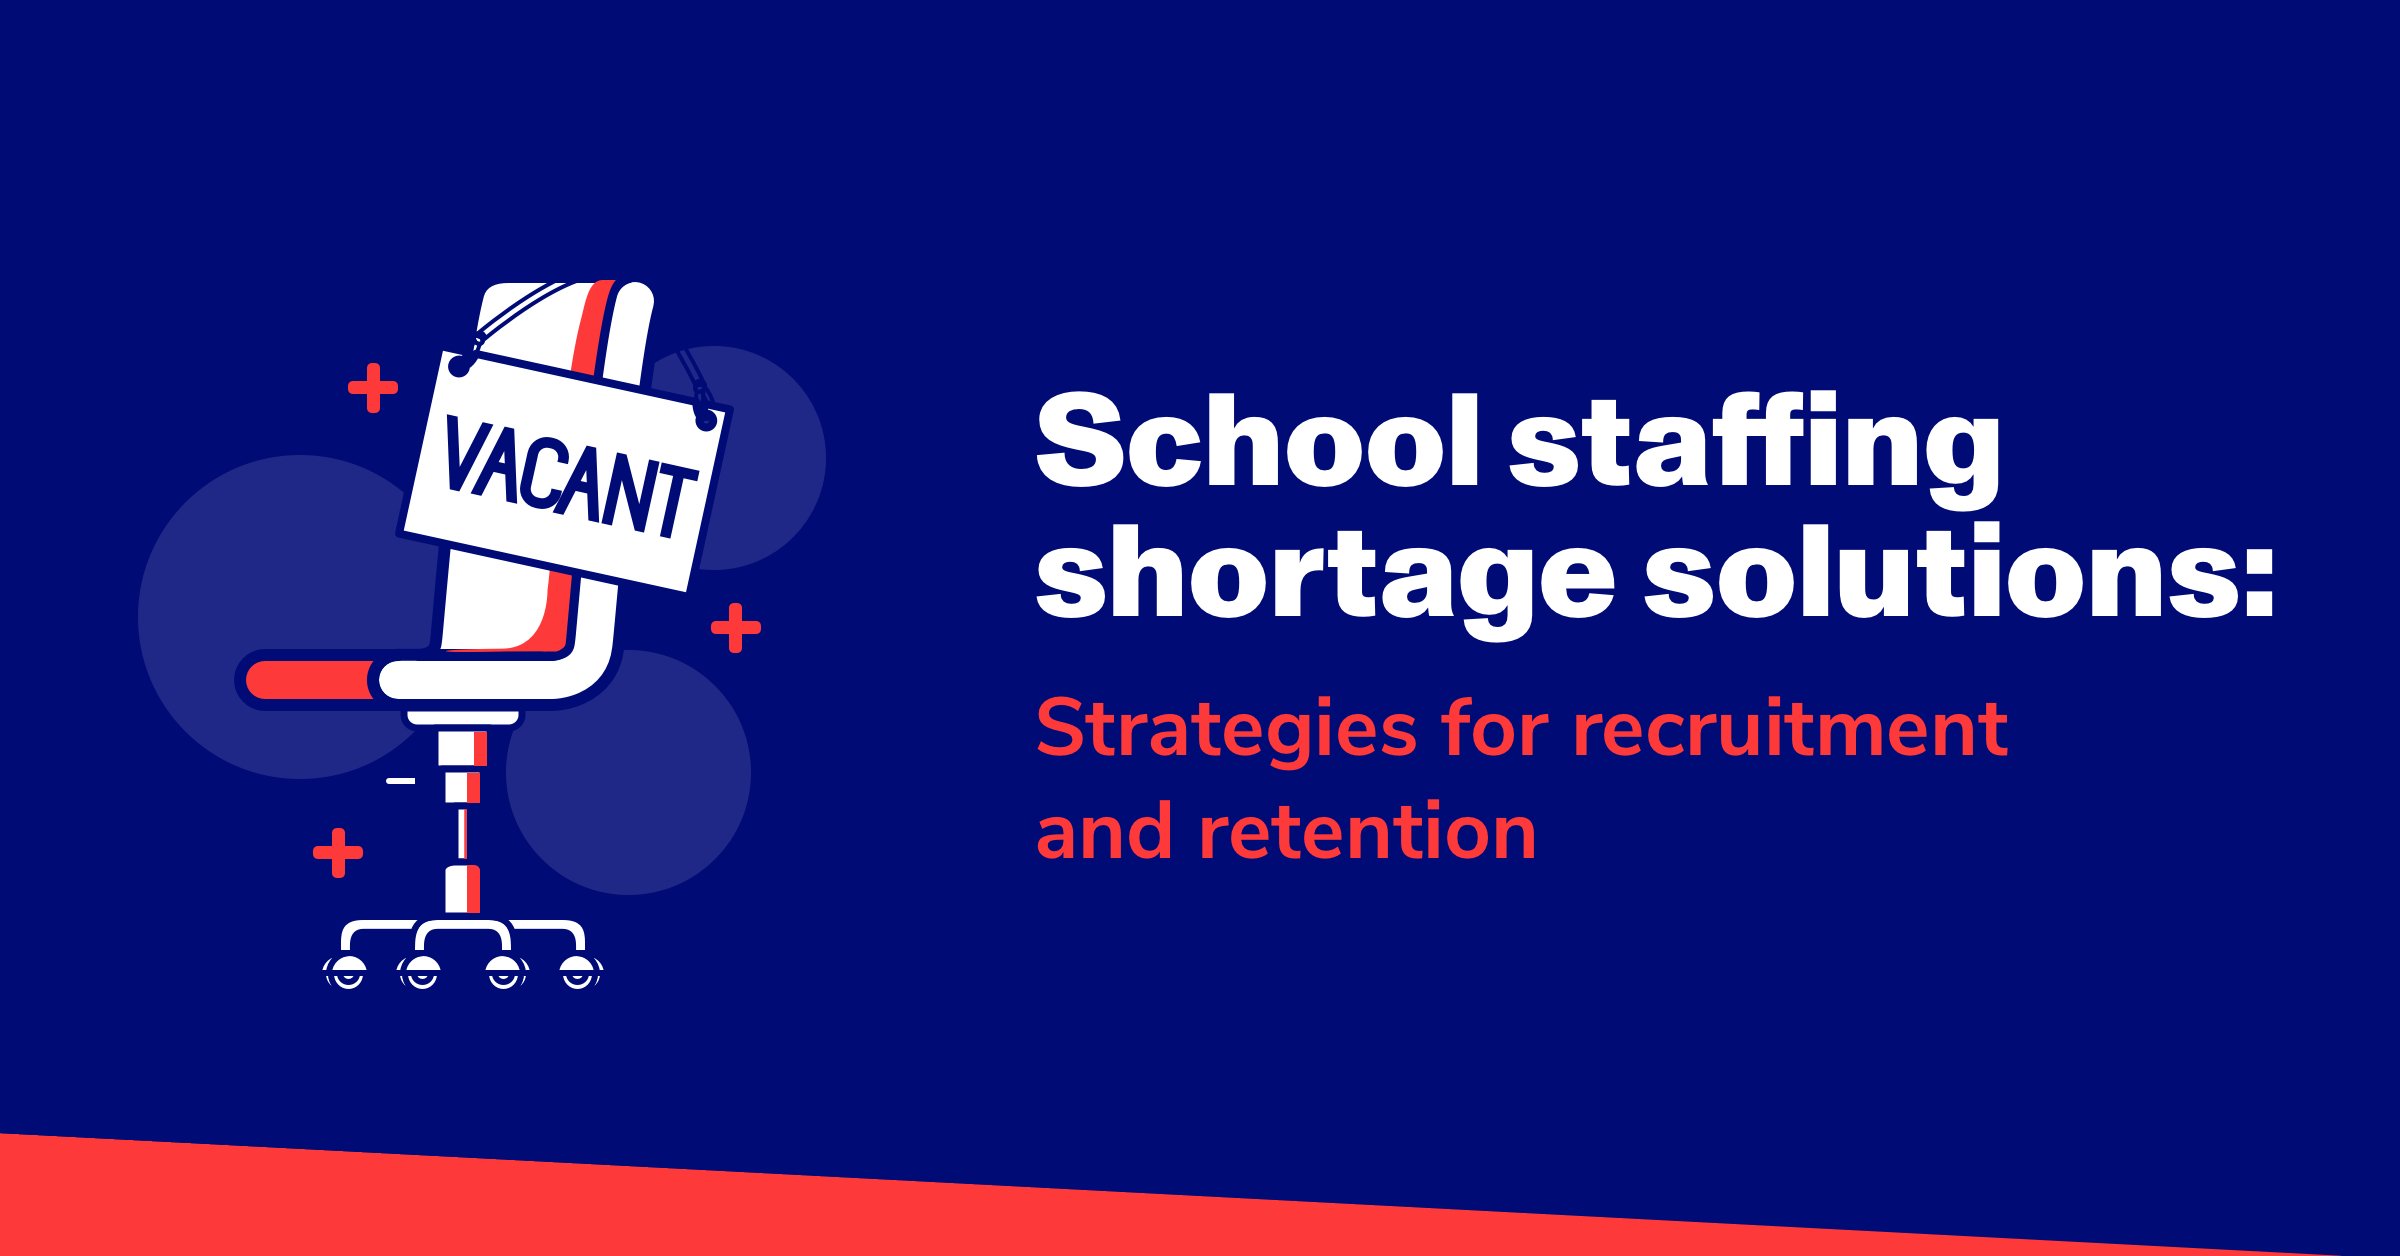 School staffing shortage solutions: Strategies for recruitment and retention